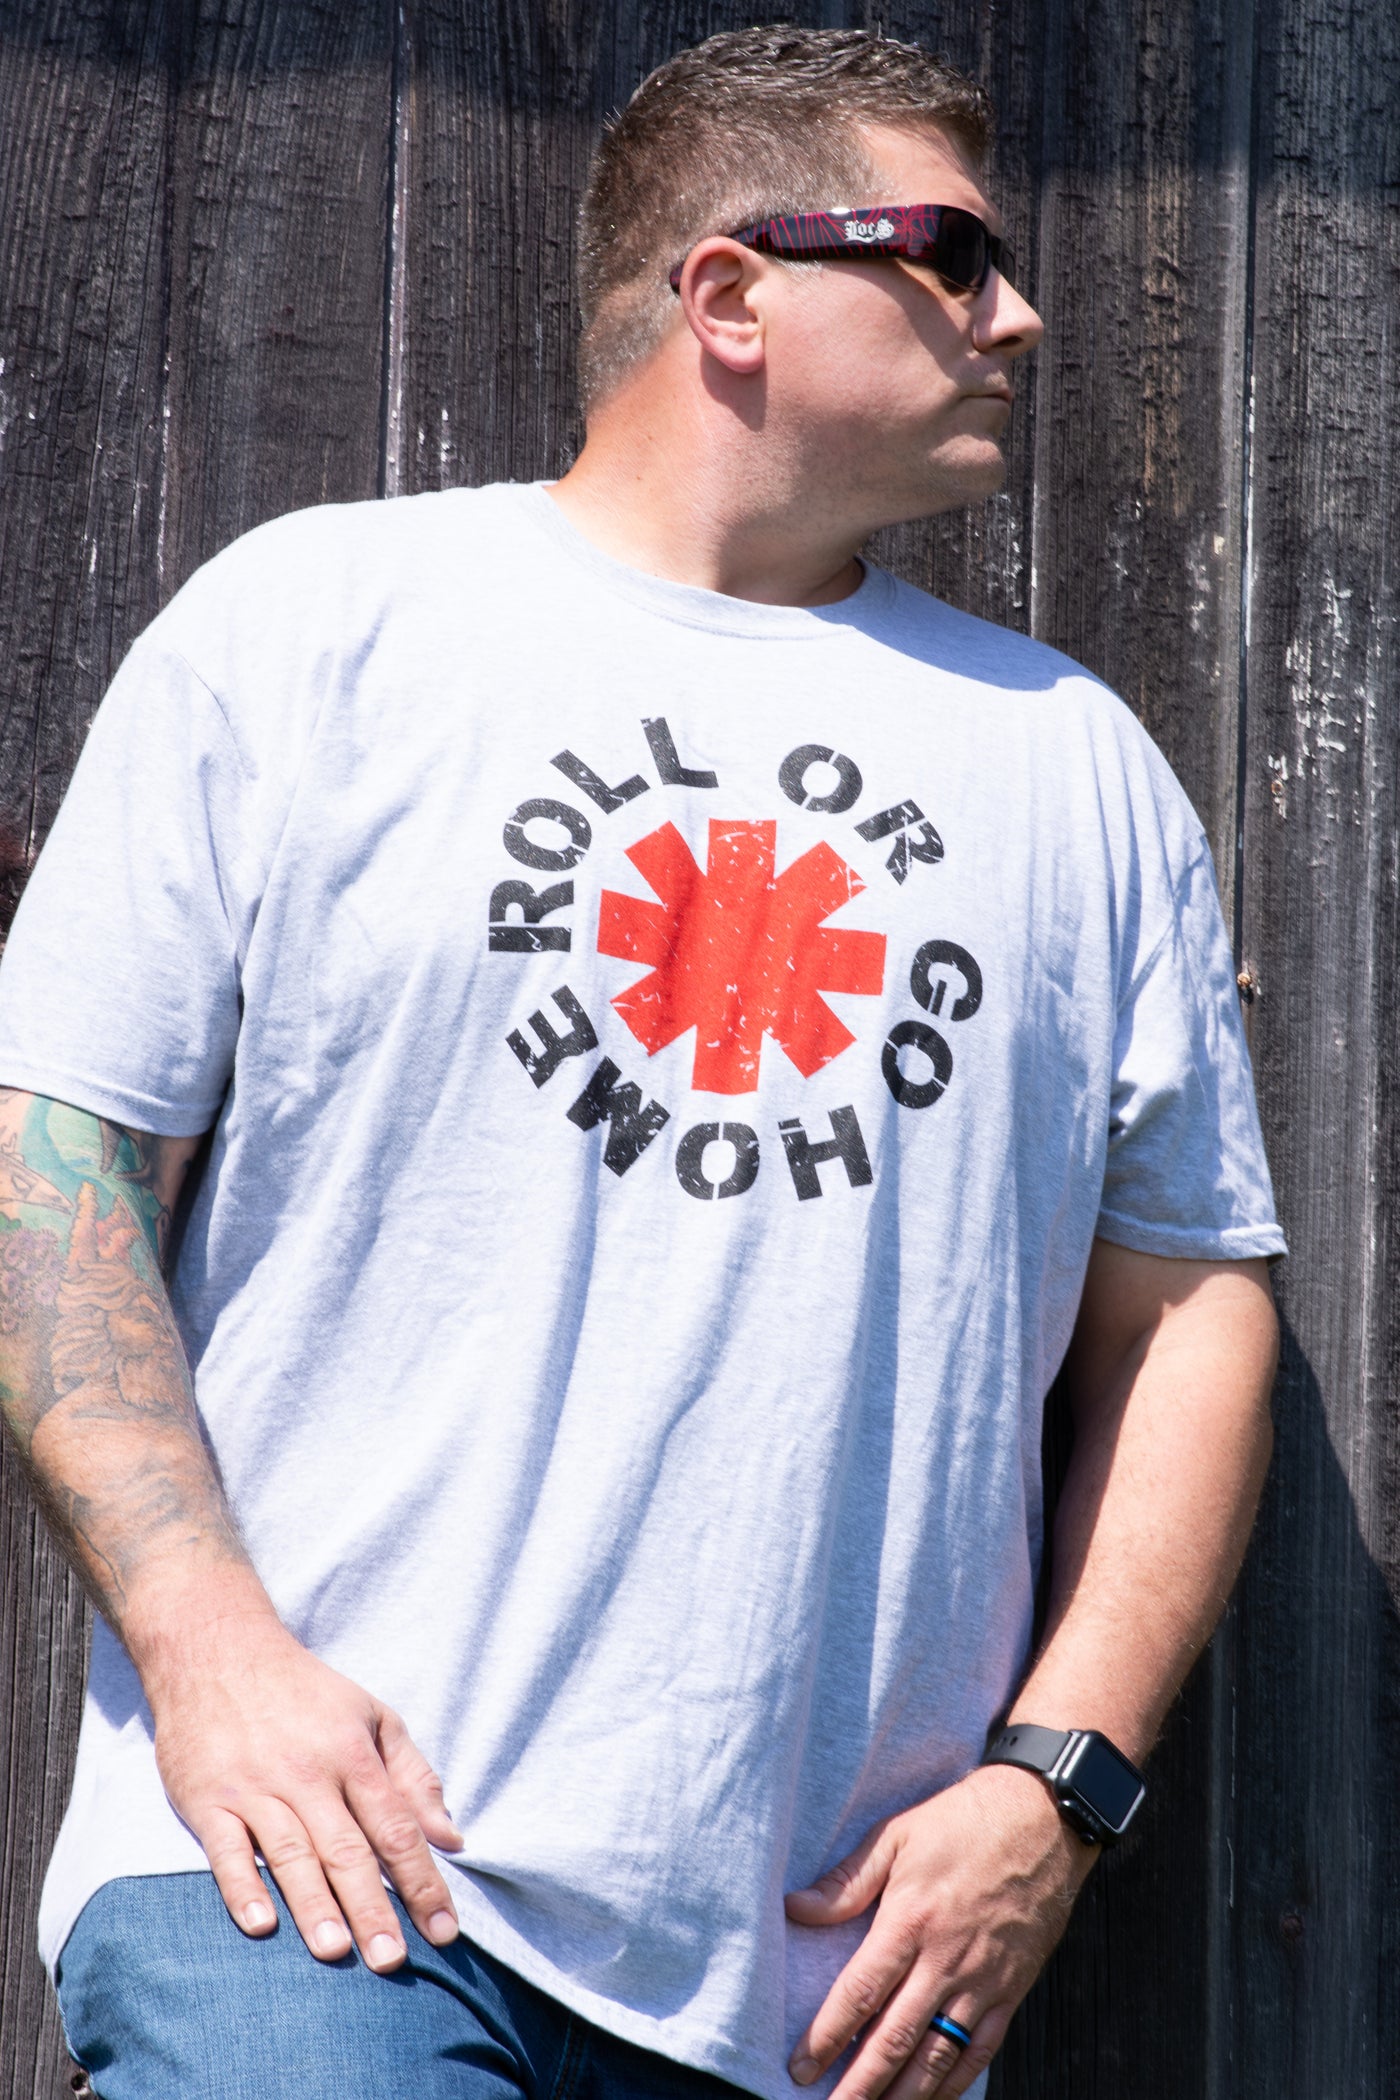 Roll or go Home Tee